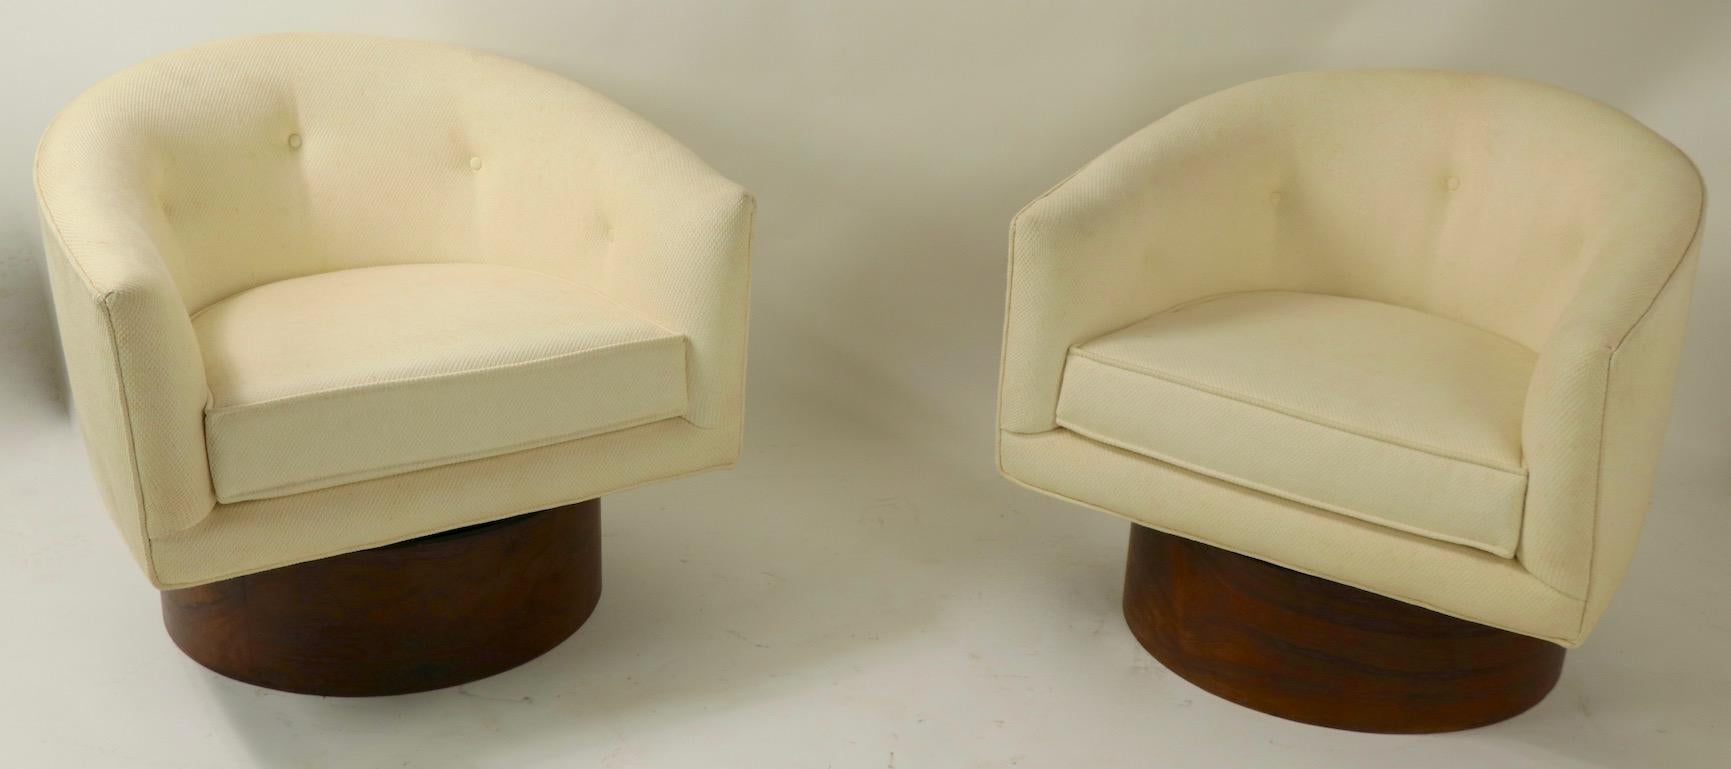 Pair of Swivel Chairs by Baughman for Thayer Coggin 1